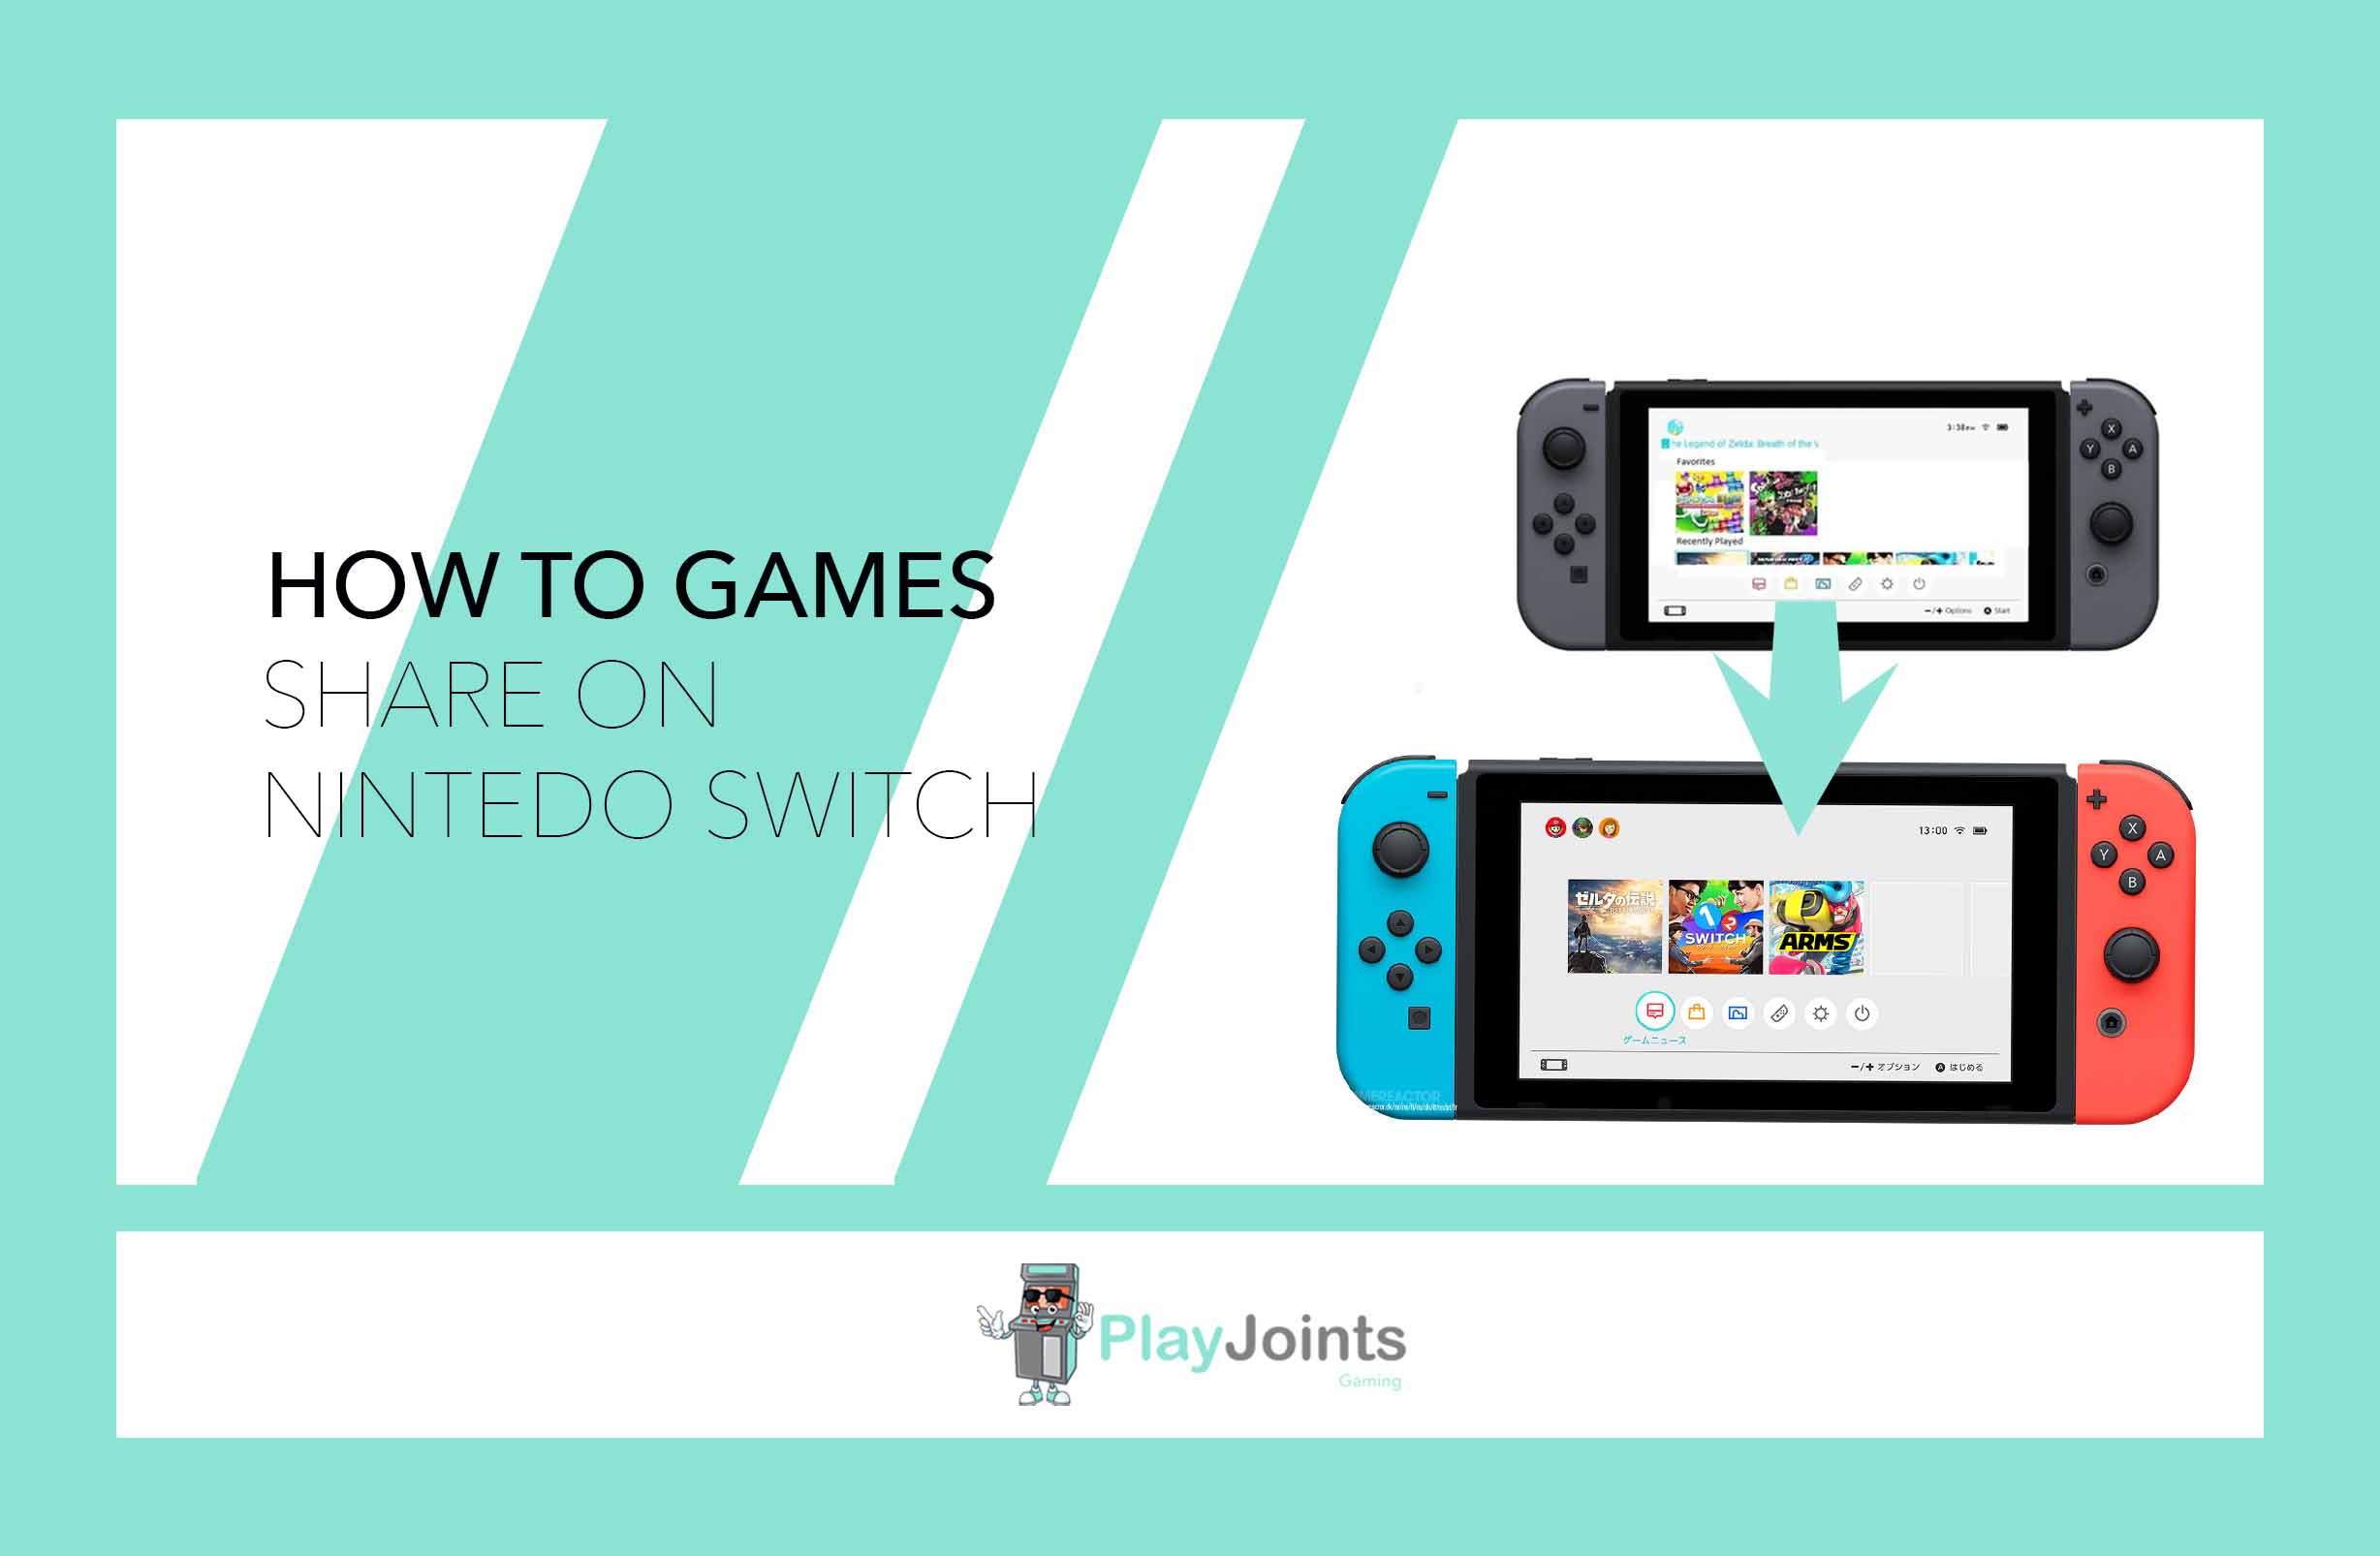 How to Game Share on Nintendo Switch